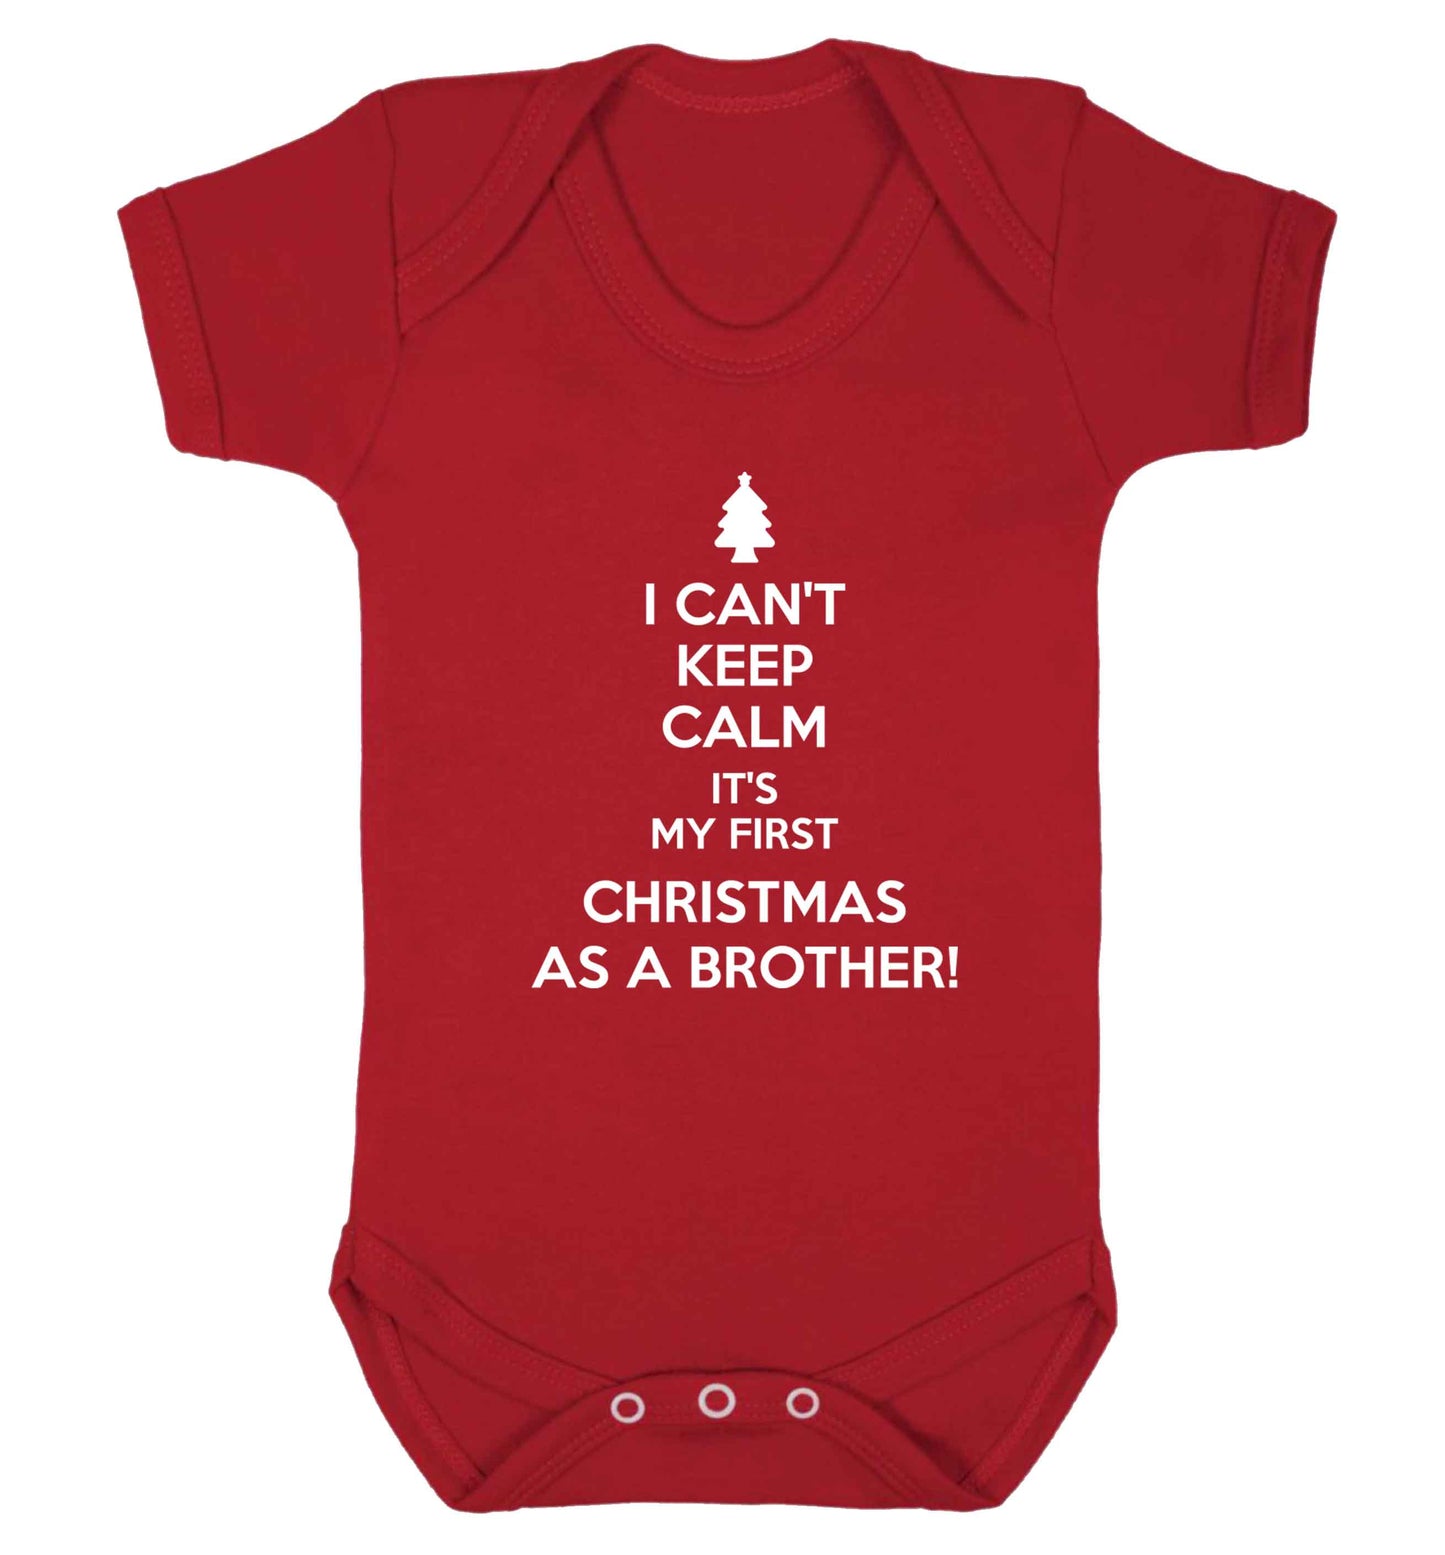 I can't keep calm it's my first Christmas as a brother! Baby Vest red 18-24 months